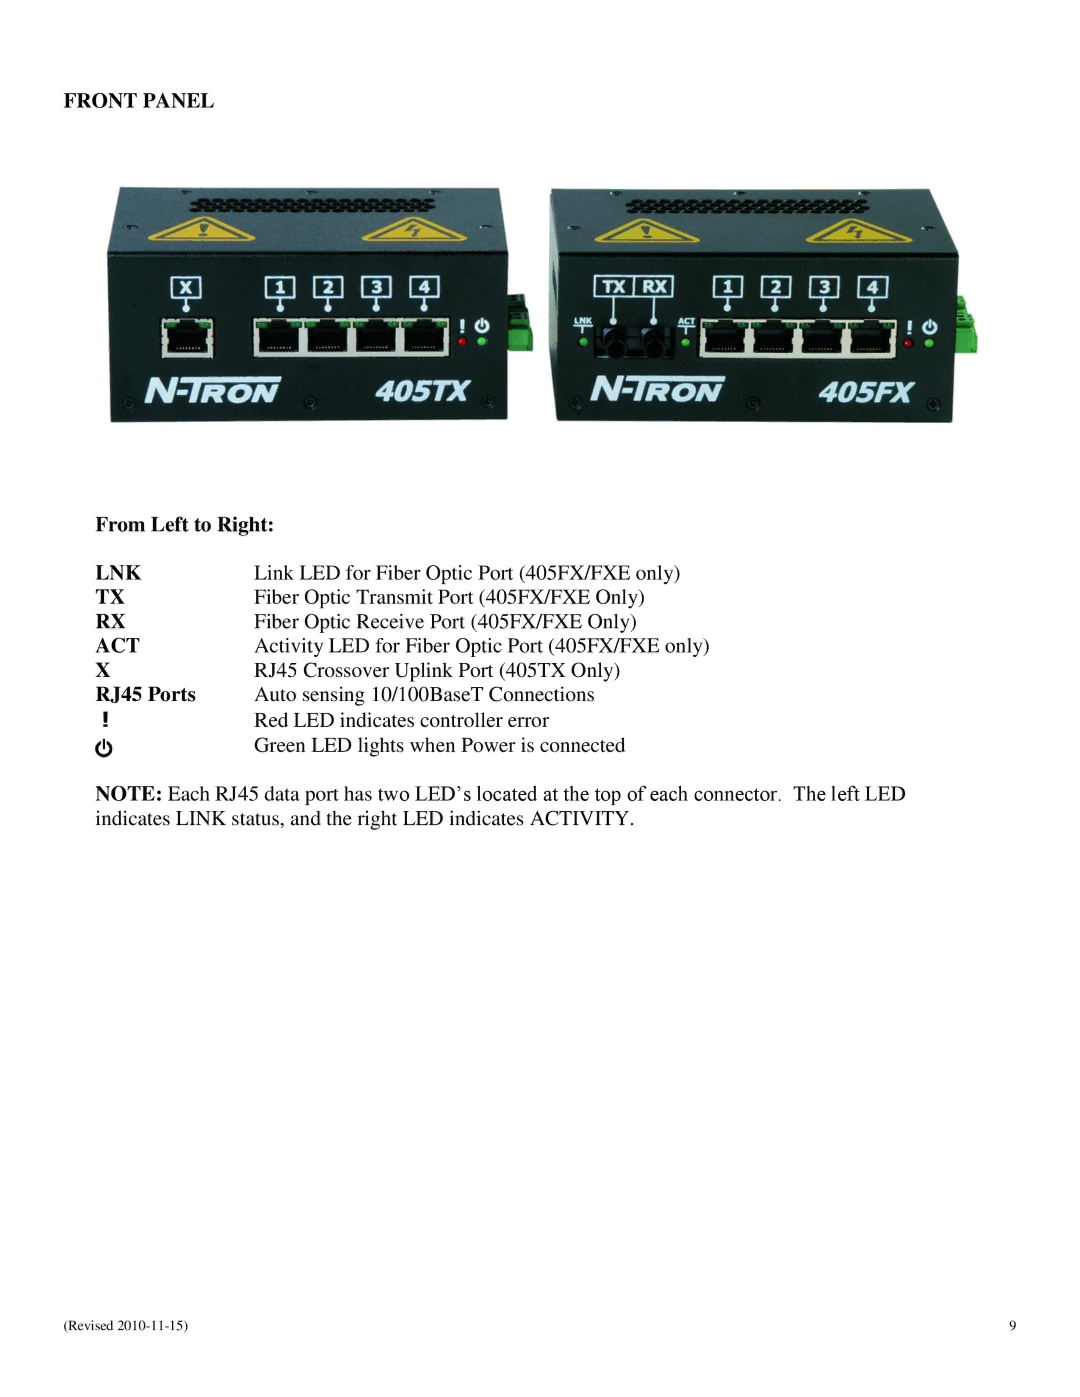 N-Tron 405FXE-ST-YY, 405FX-ST, 405FXE-SC-YY, 405FX-SC manual Front Panel, From Left to Right, Lnk, Act, RJ45 Ports 